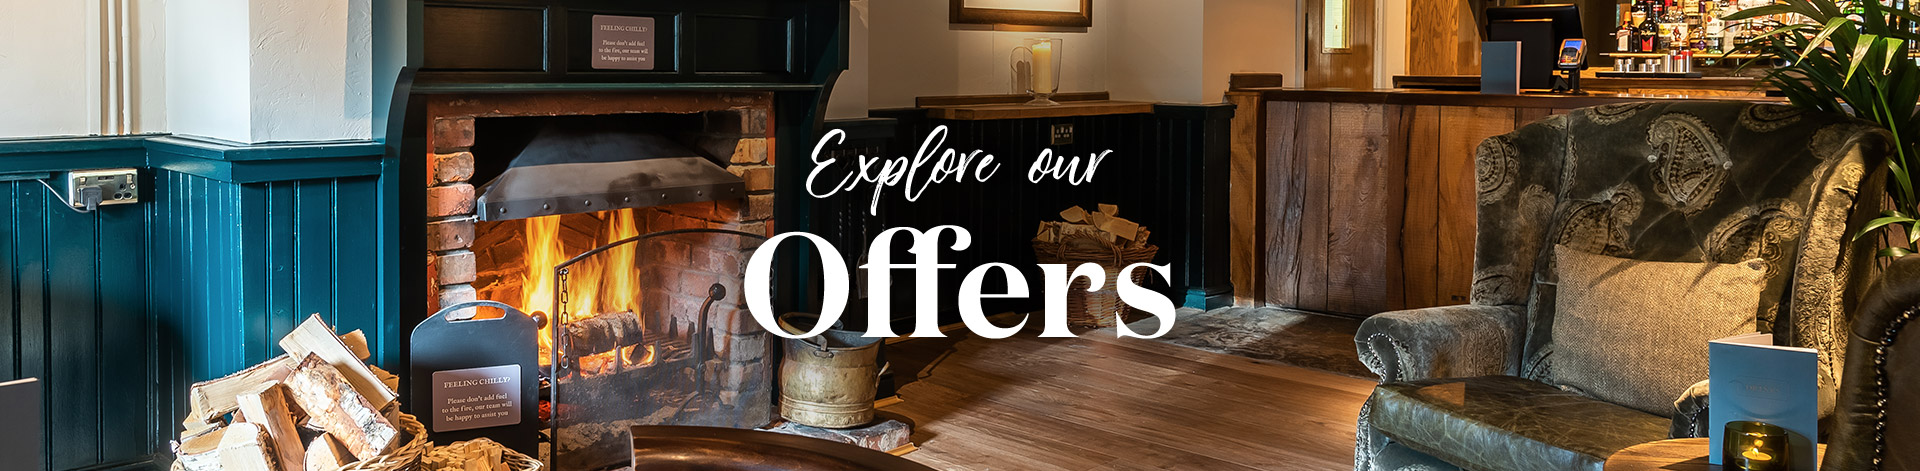 Our latest offers at The Cowherds